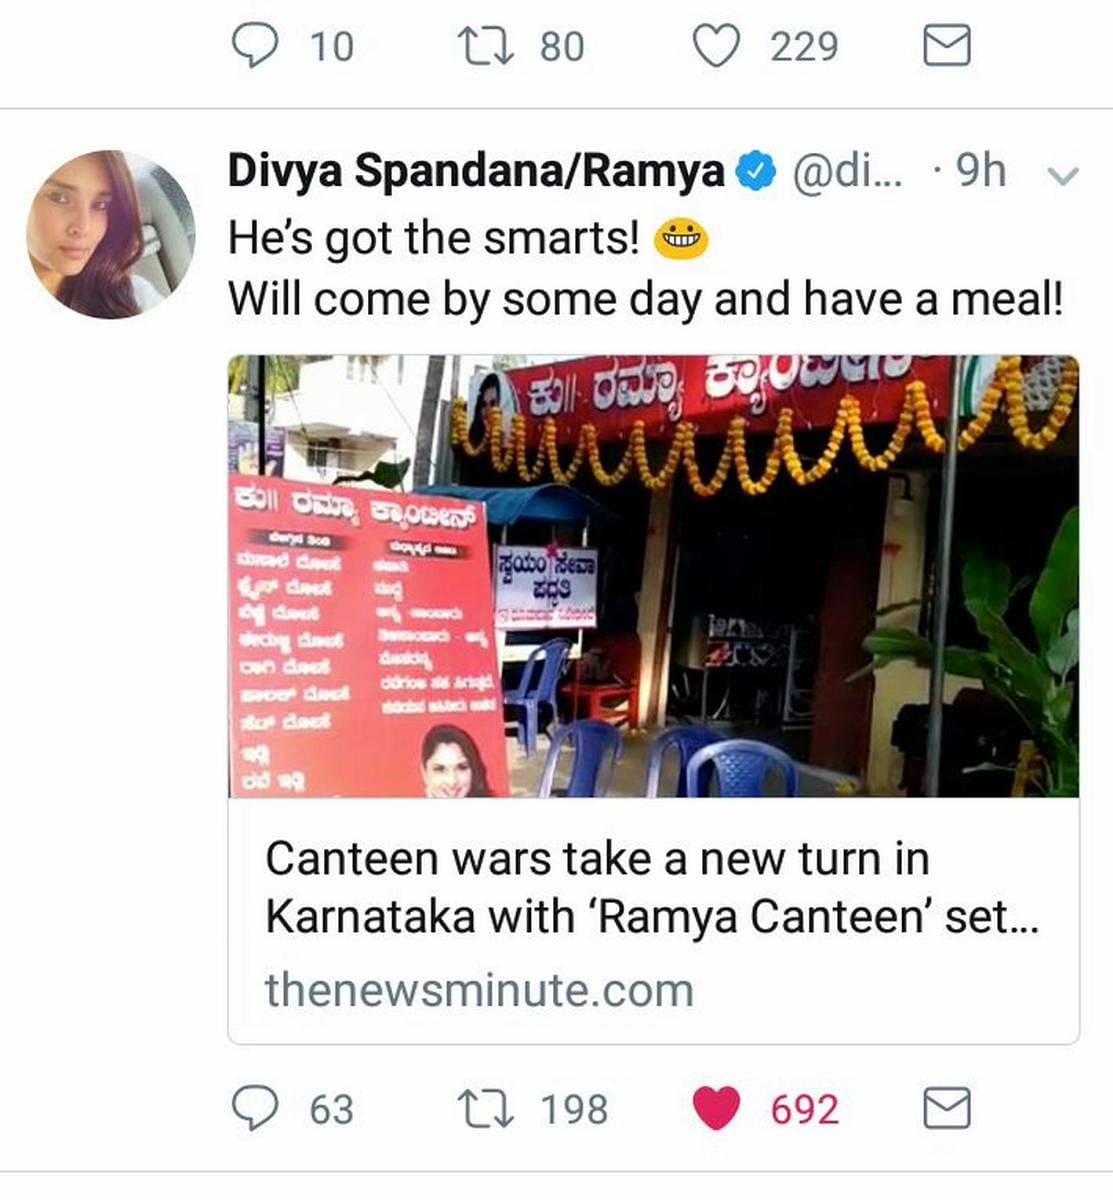 Ramya has commented about Ramya canteen in her twitter account and has posted a picture.